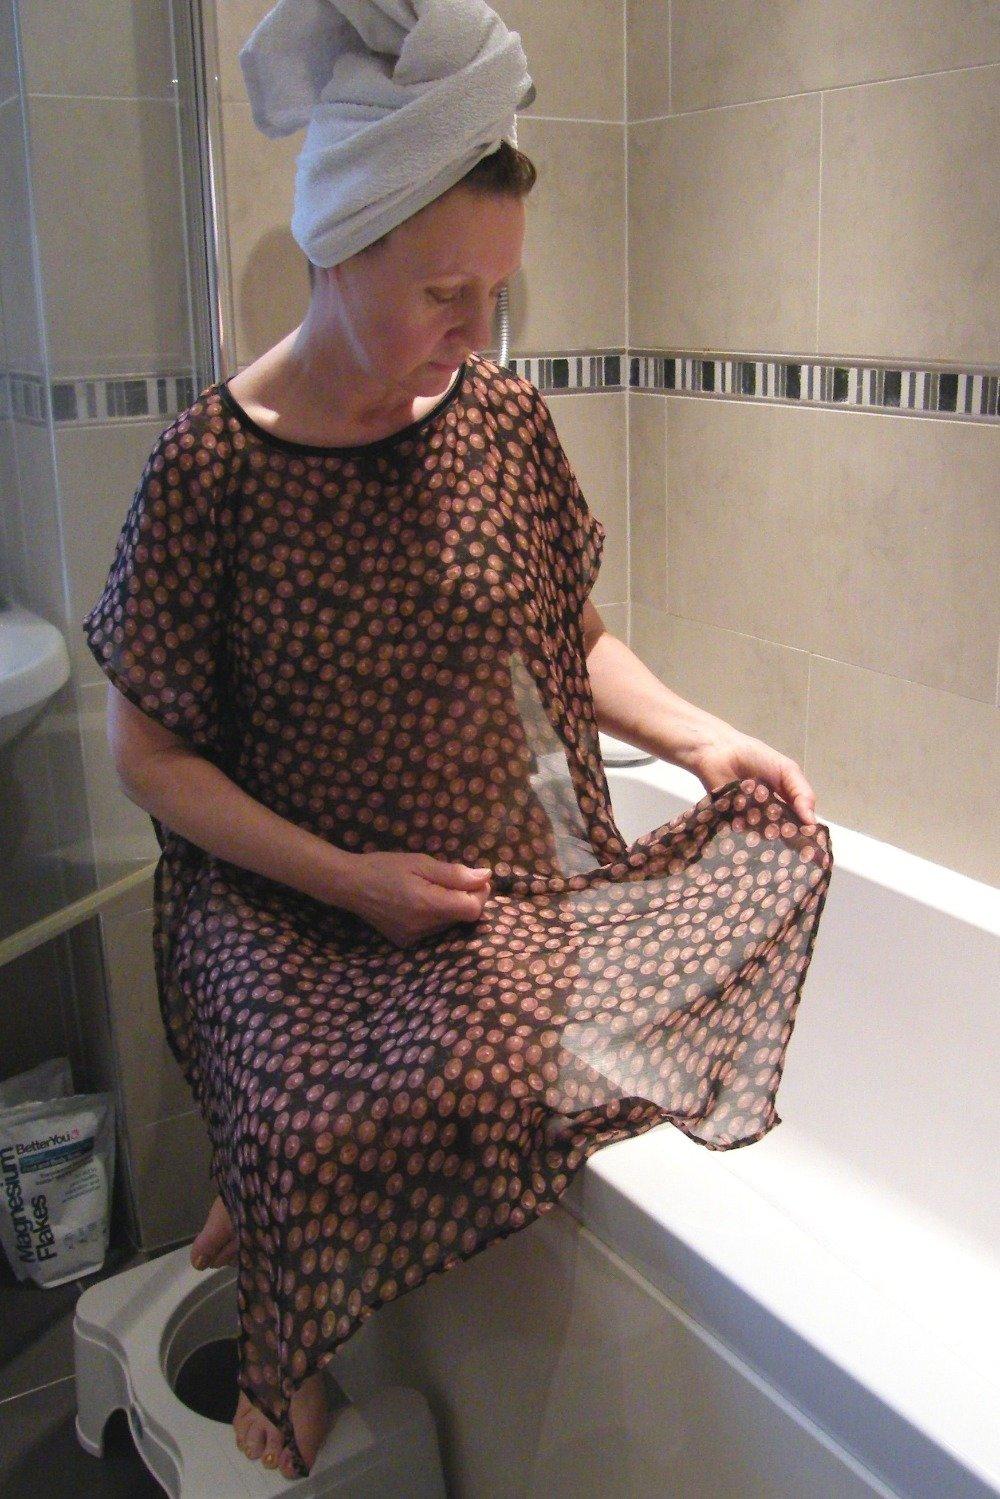 Black/Tan cherries NeverNaked(tm) Shower Drapron® / dementia dignity showering cape drapes over shoulders to be left on whilst showering so dignity is maintained